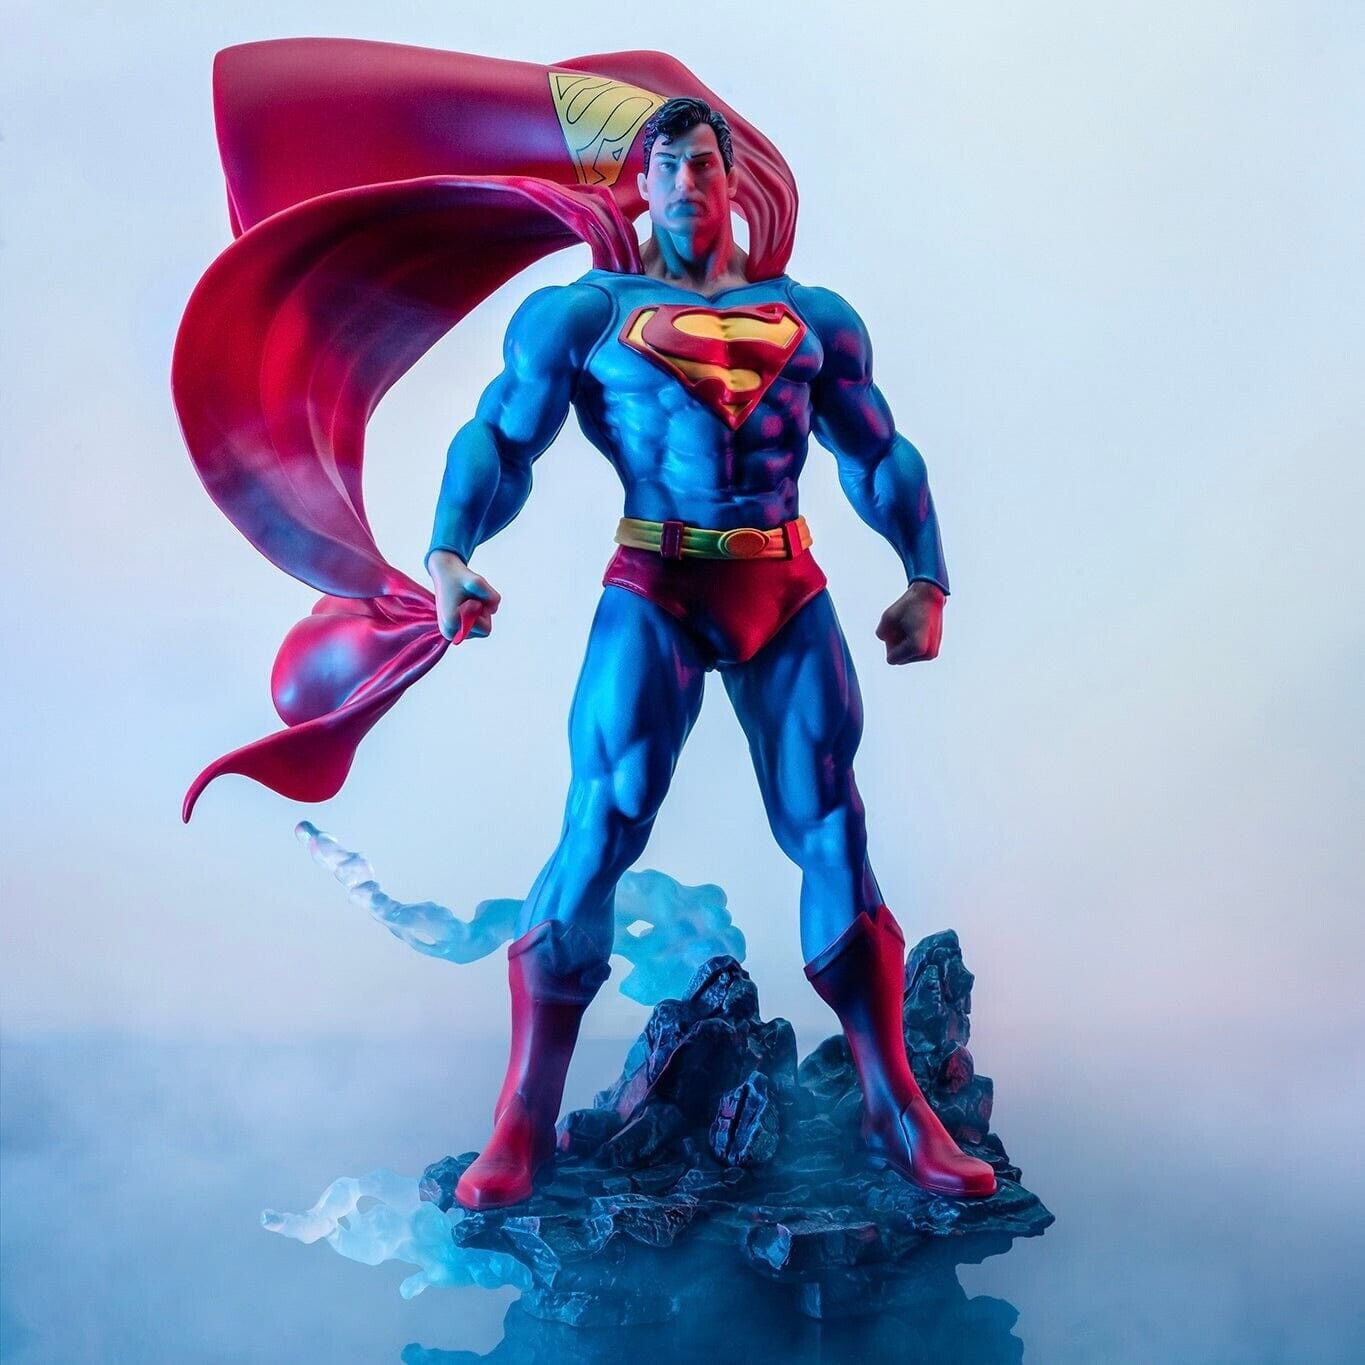 DC Heroes Superman Classic Version 1:8 Scale Statue (Previews Exclusive)